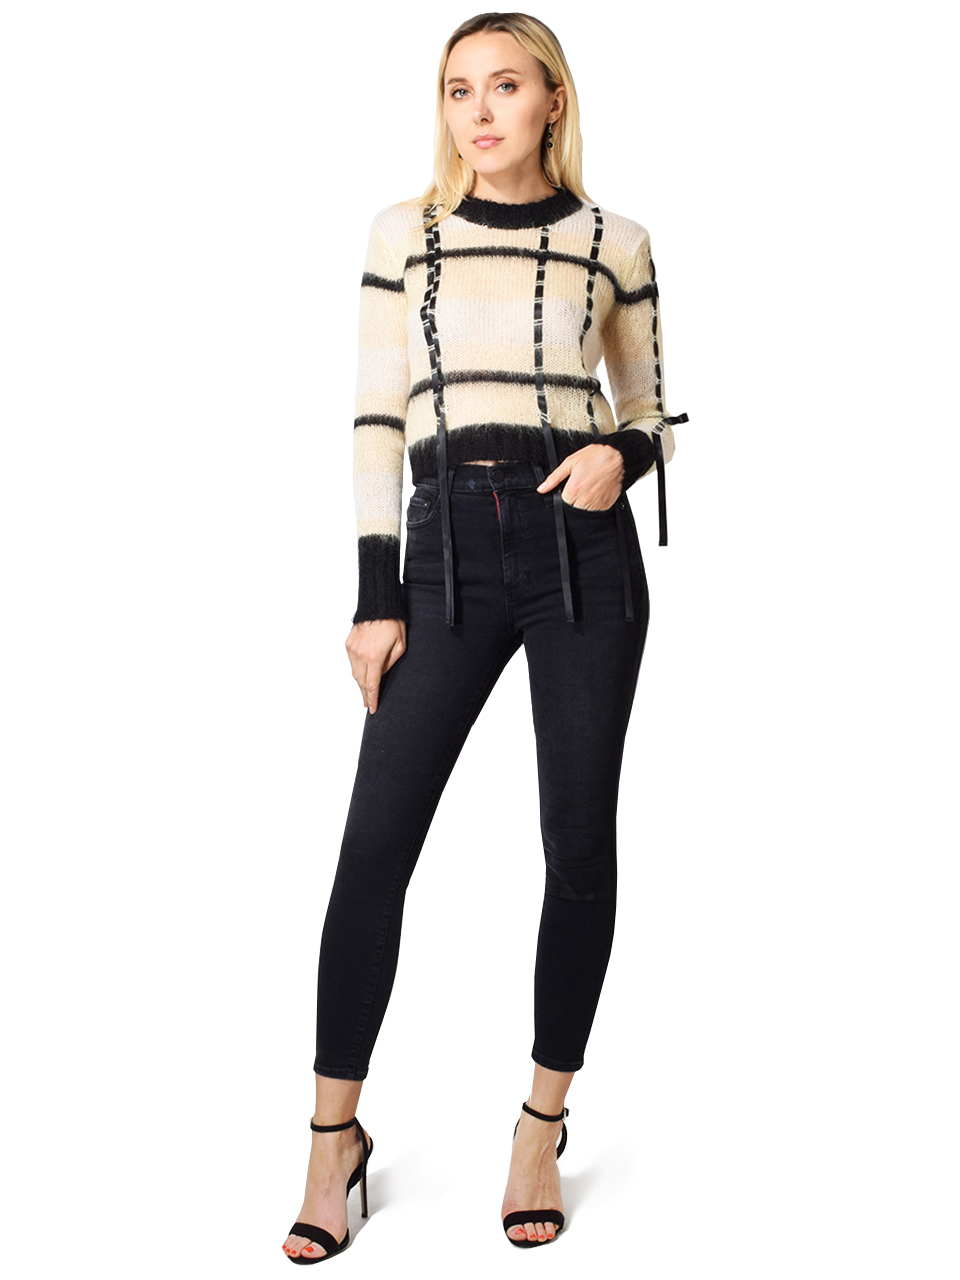 Alice & Olivia Good High Rise Skinny Jean in Noir Front View 